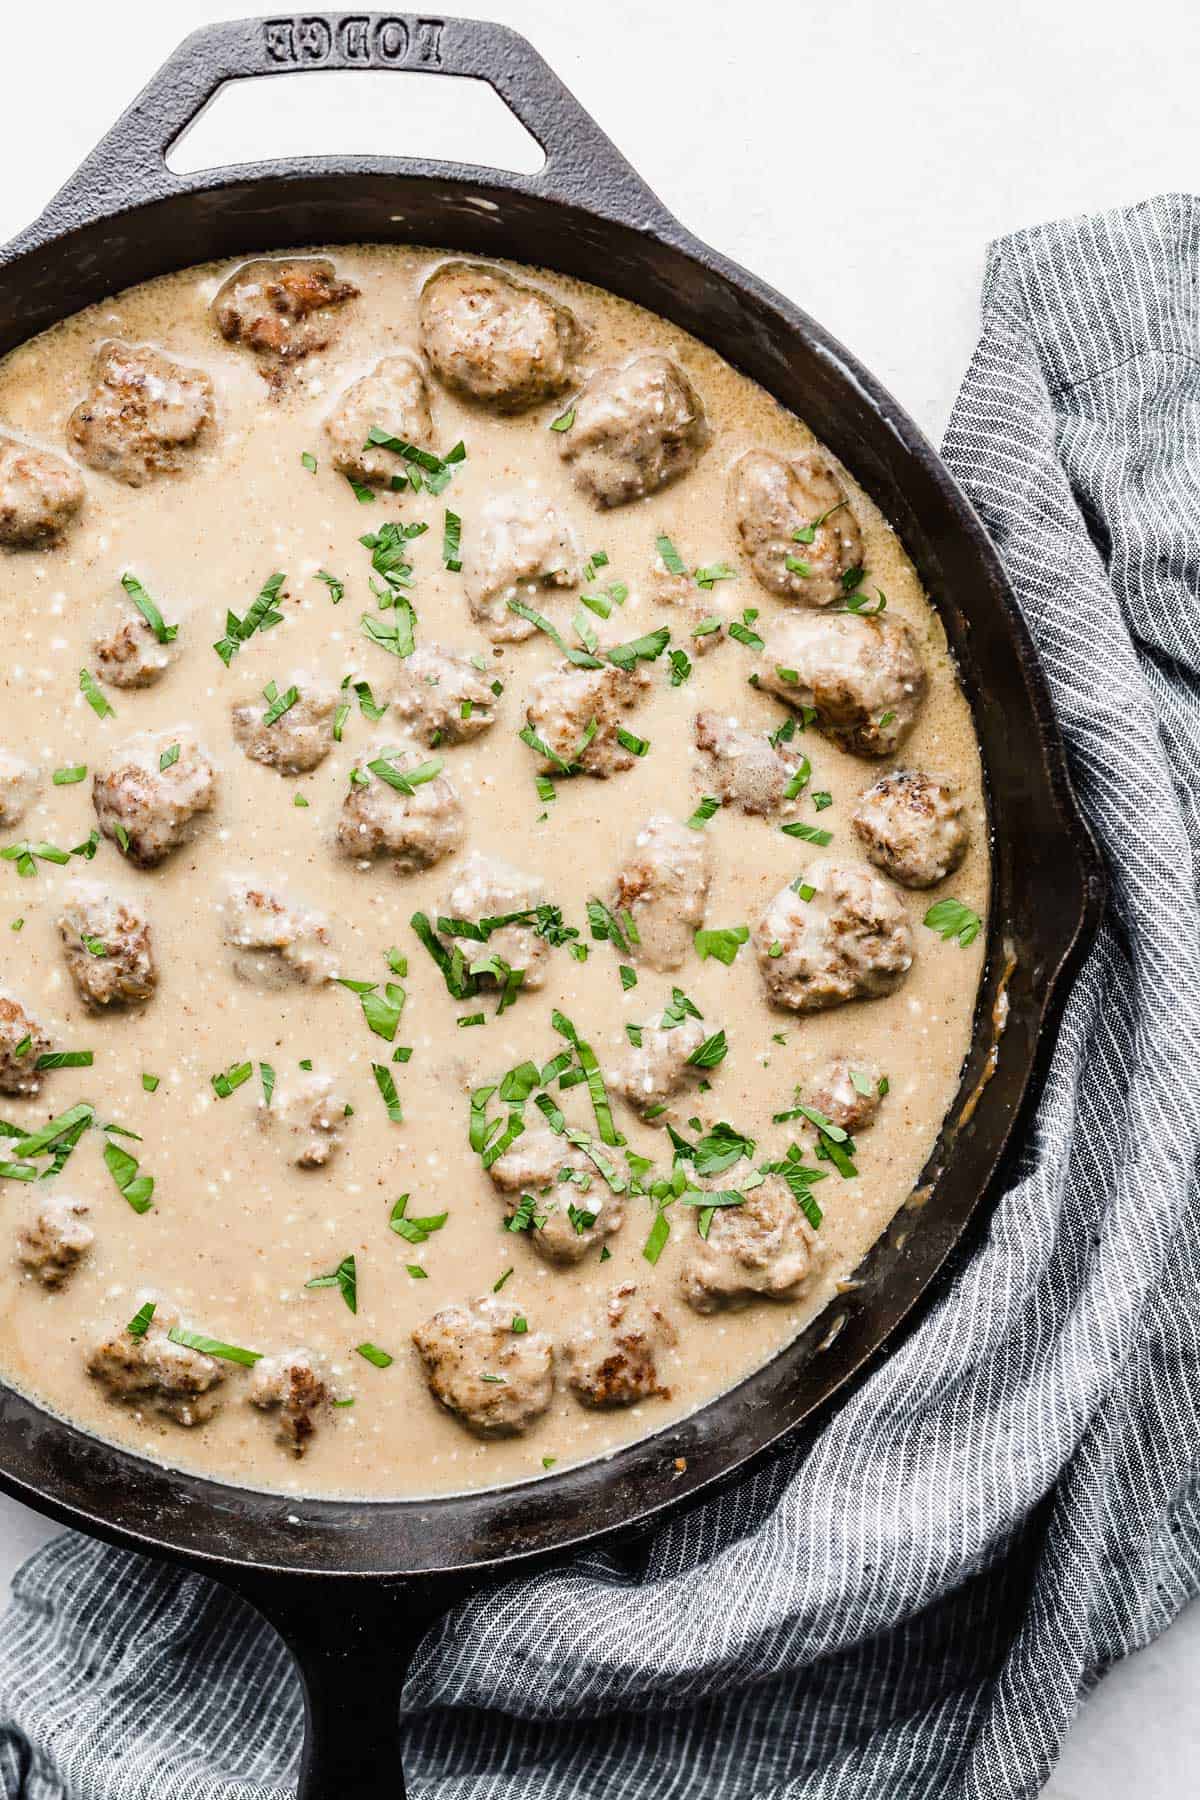 A skillet full of Swedish Meatballs and tan colored sauce on a white background.